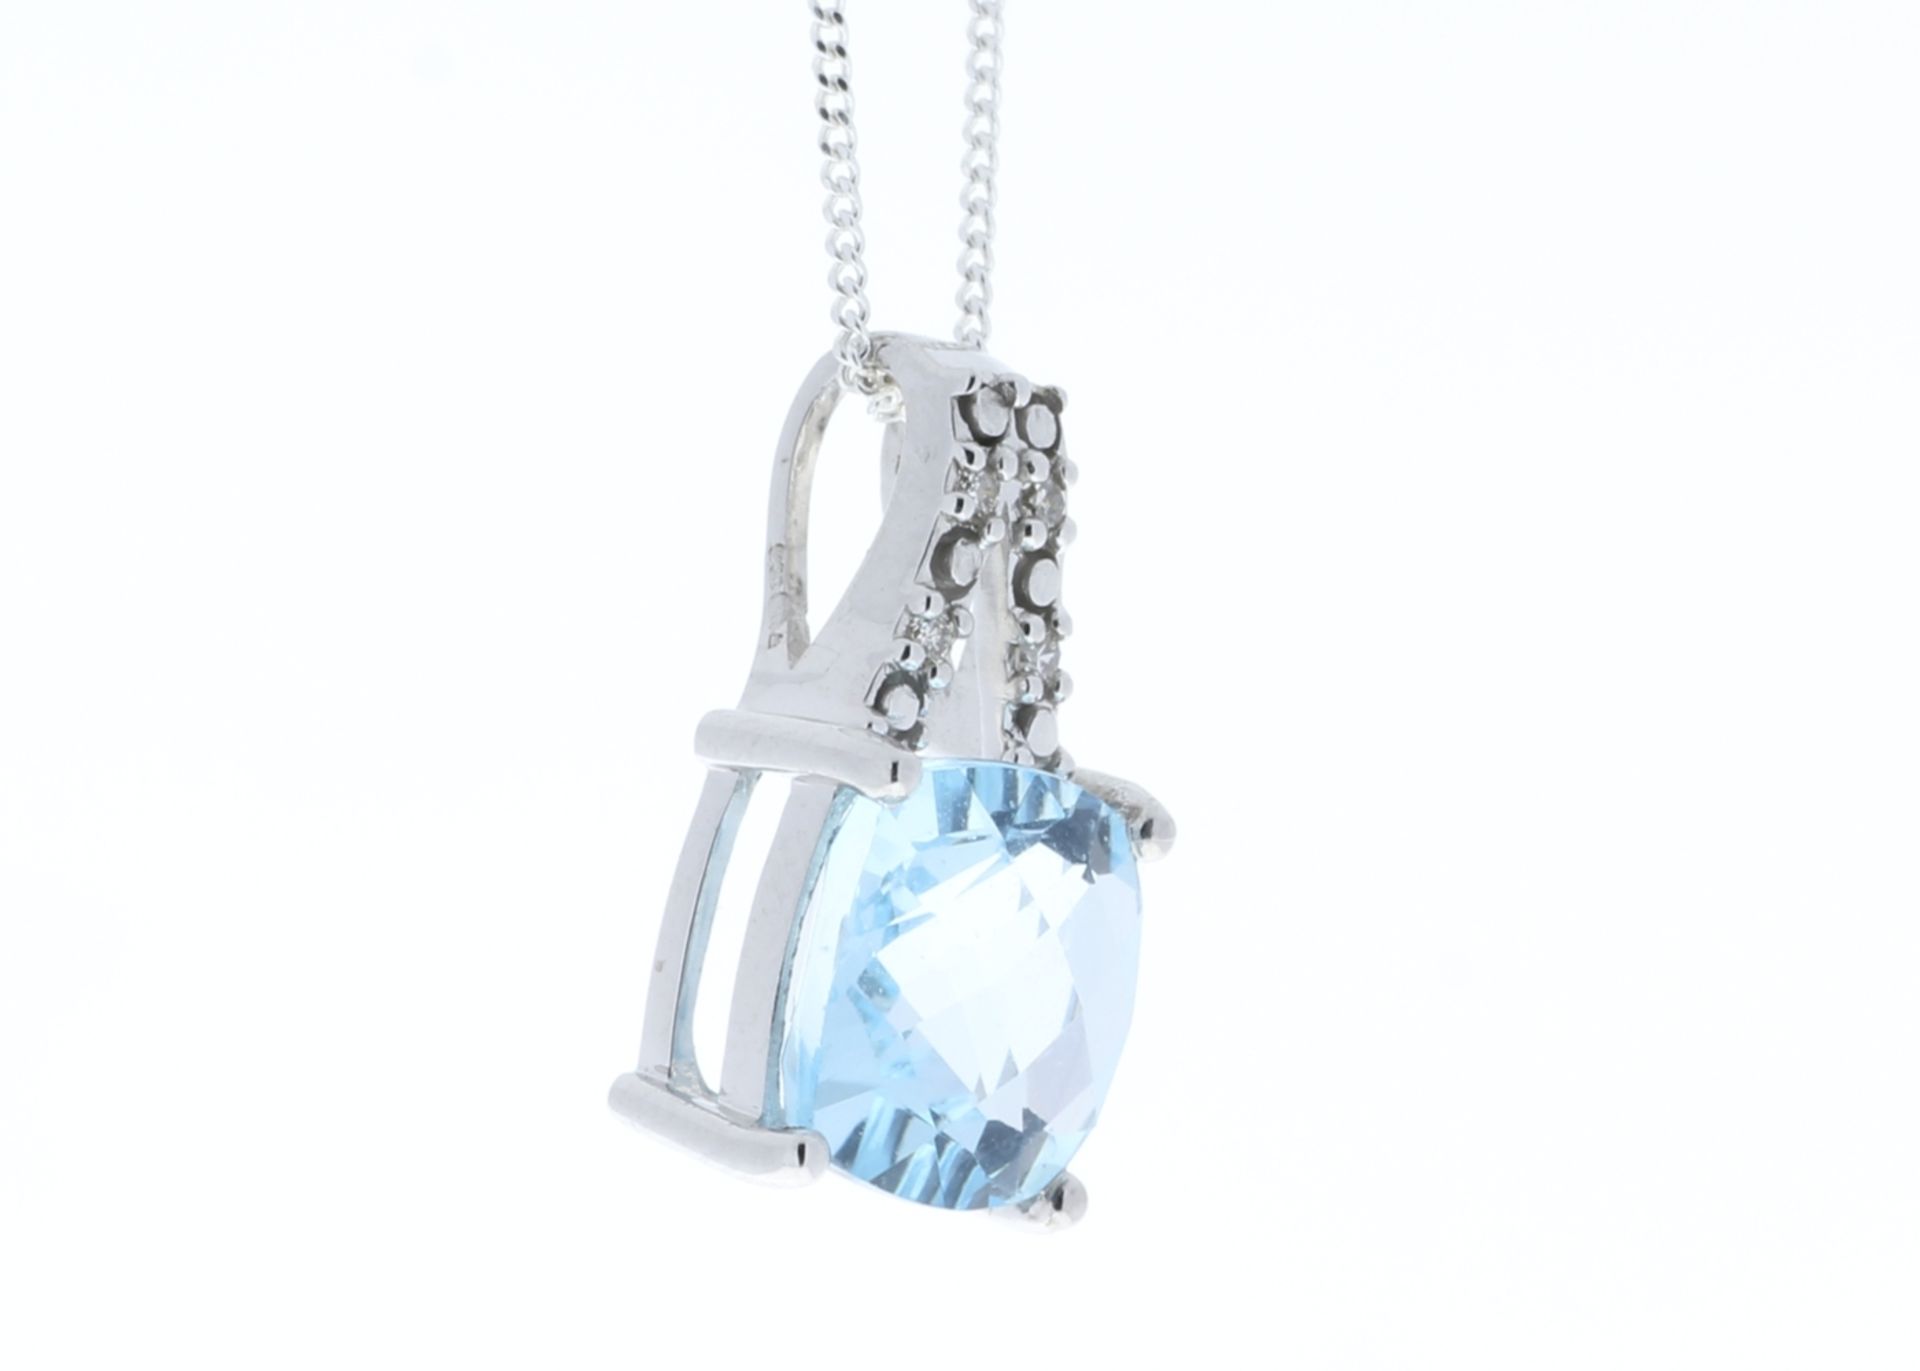 9ct White Gold Diamond And Blue Topaz Pendant (BT3.54) 0.05 Carats - Valued By GIE £1,470.00 - A - Image 7 of 10